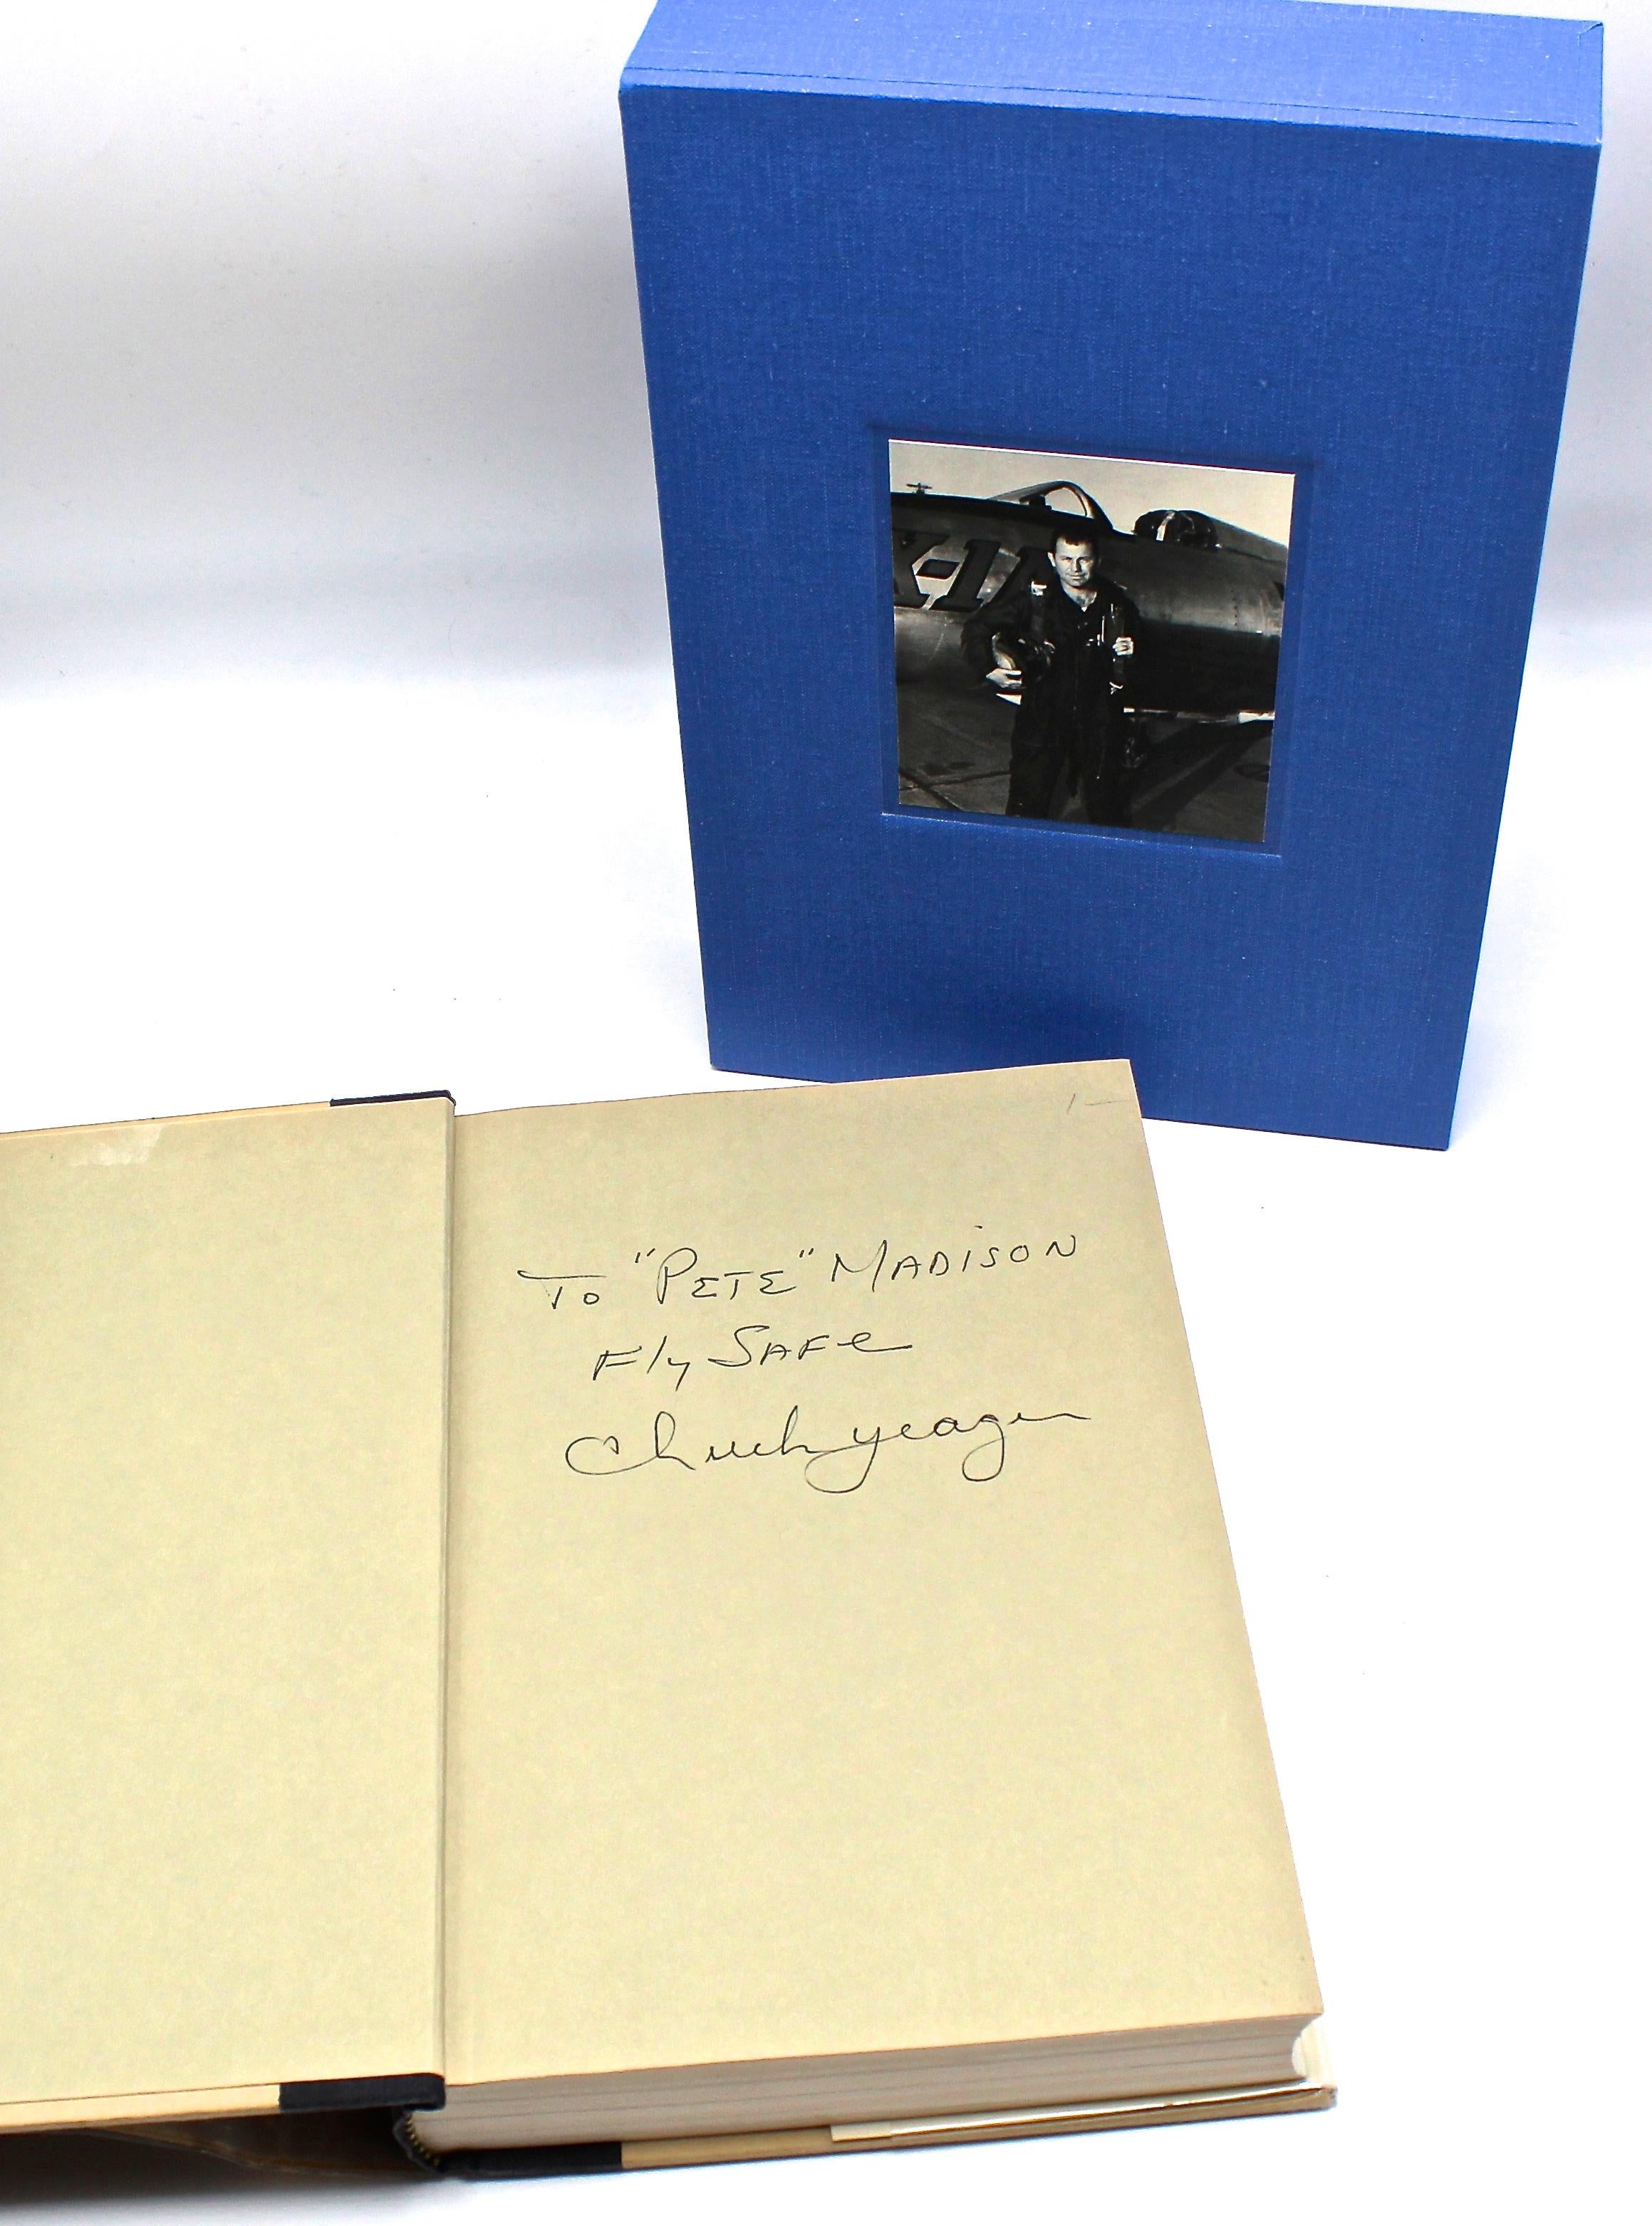 Yeager, Chuck and Leo Janos. Yeager: An Autobiography. New York: Bantam Books, 1985. Early printing signed and inscribed by Yeager. Has original dust jacket and is housed in custom slipcase.

This early printing of Yeager: An Autobiography was